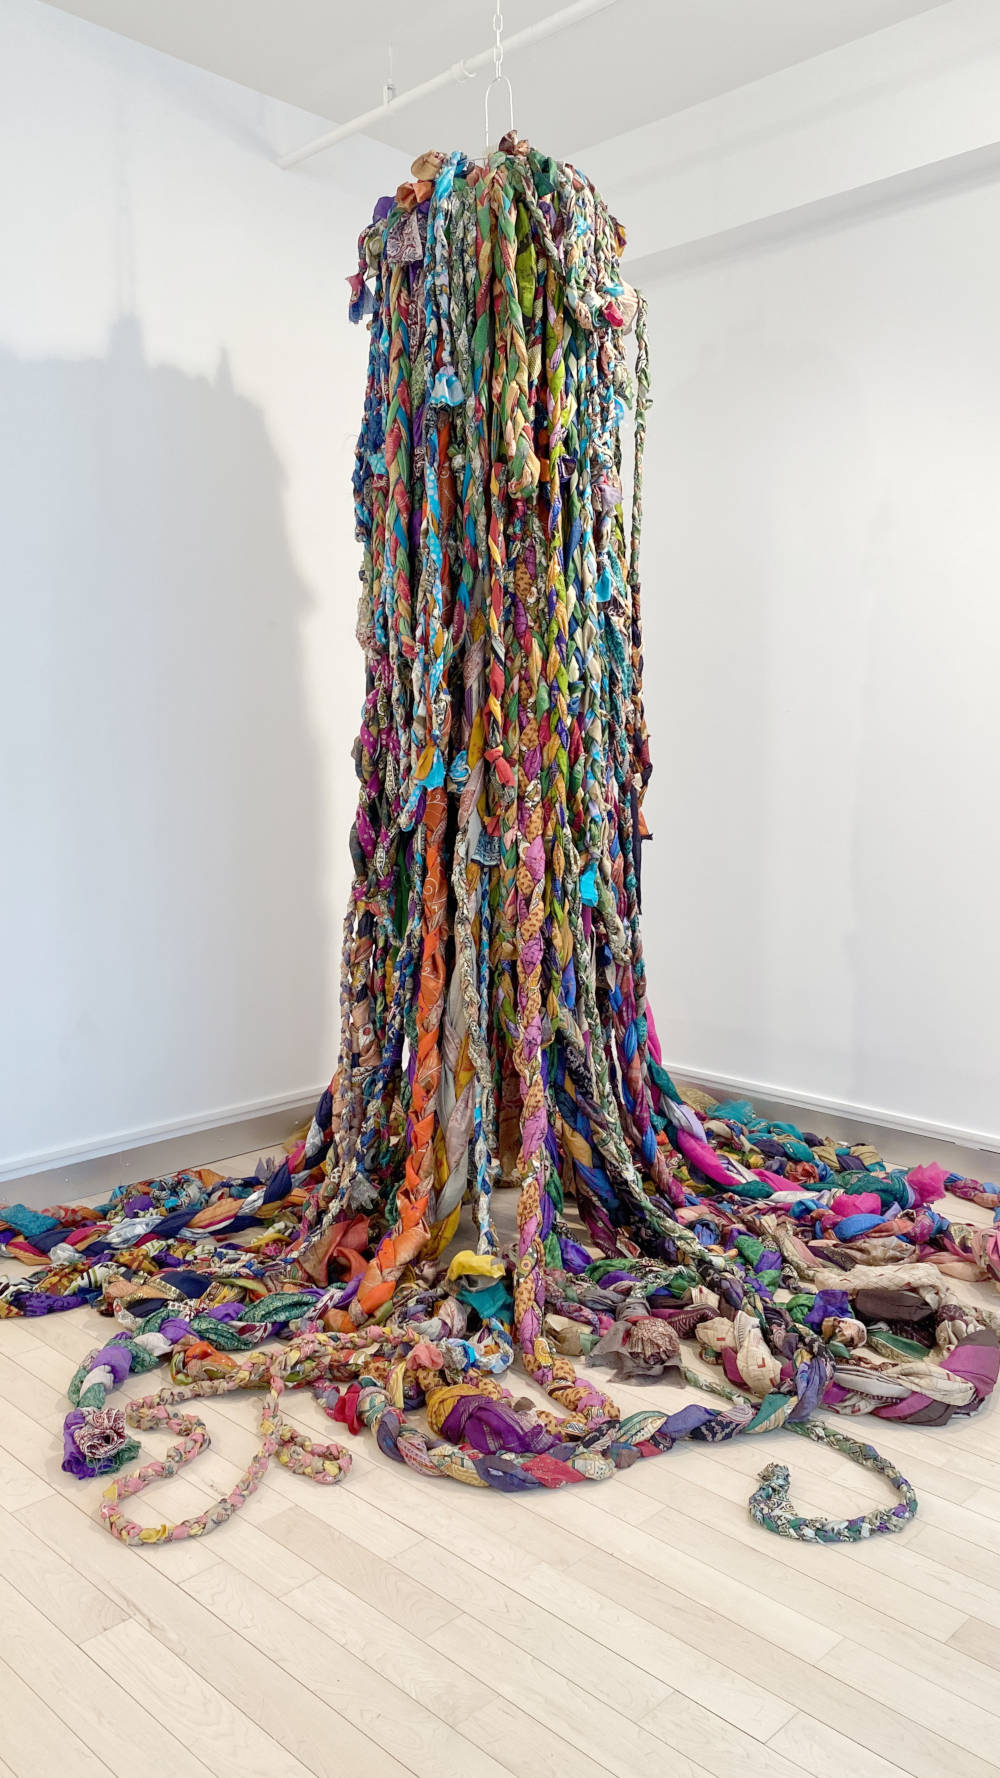 History Reclaimed: Suchitra Mattai and Adrienne Elise Tarver at Hollis ...